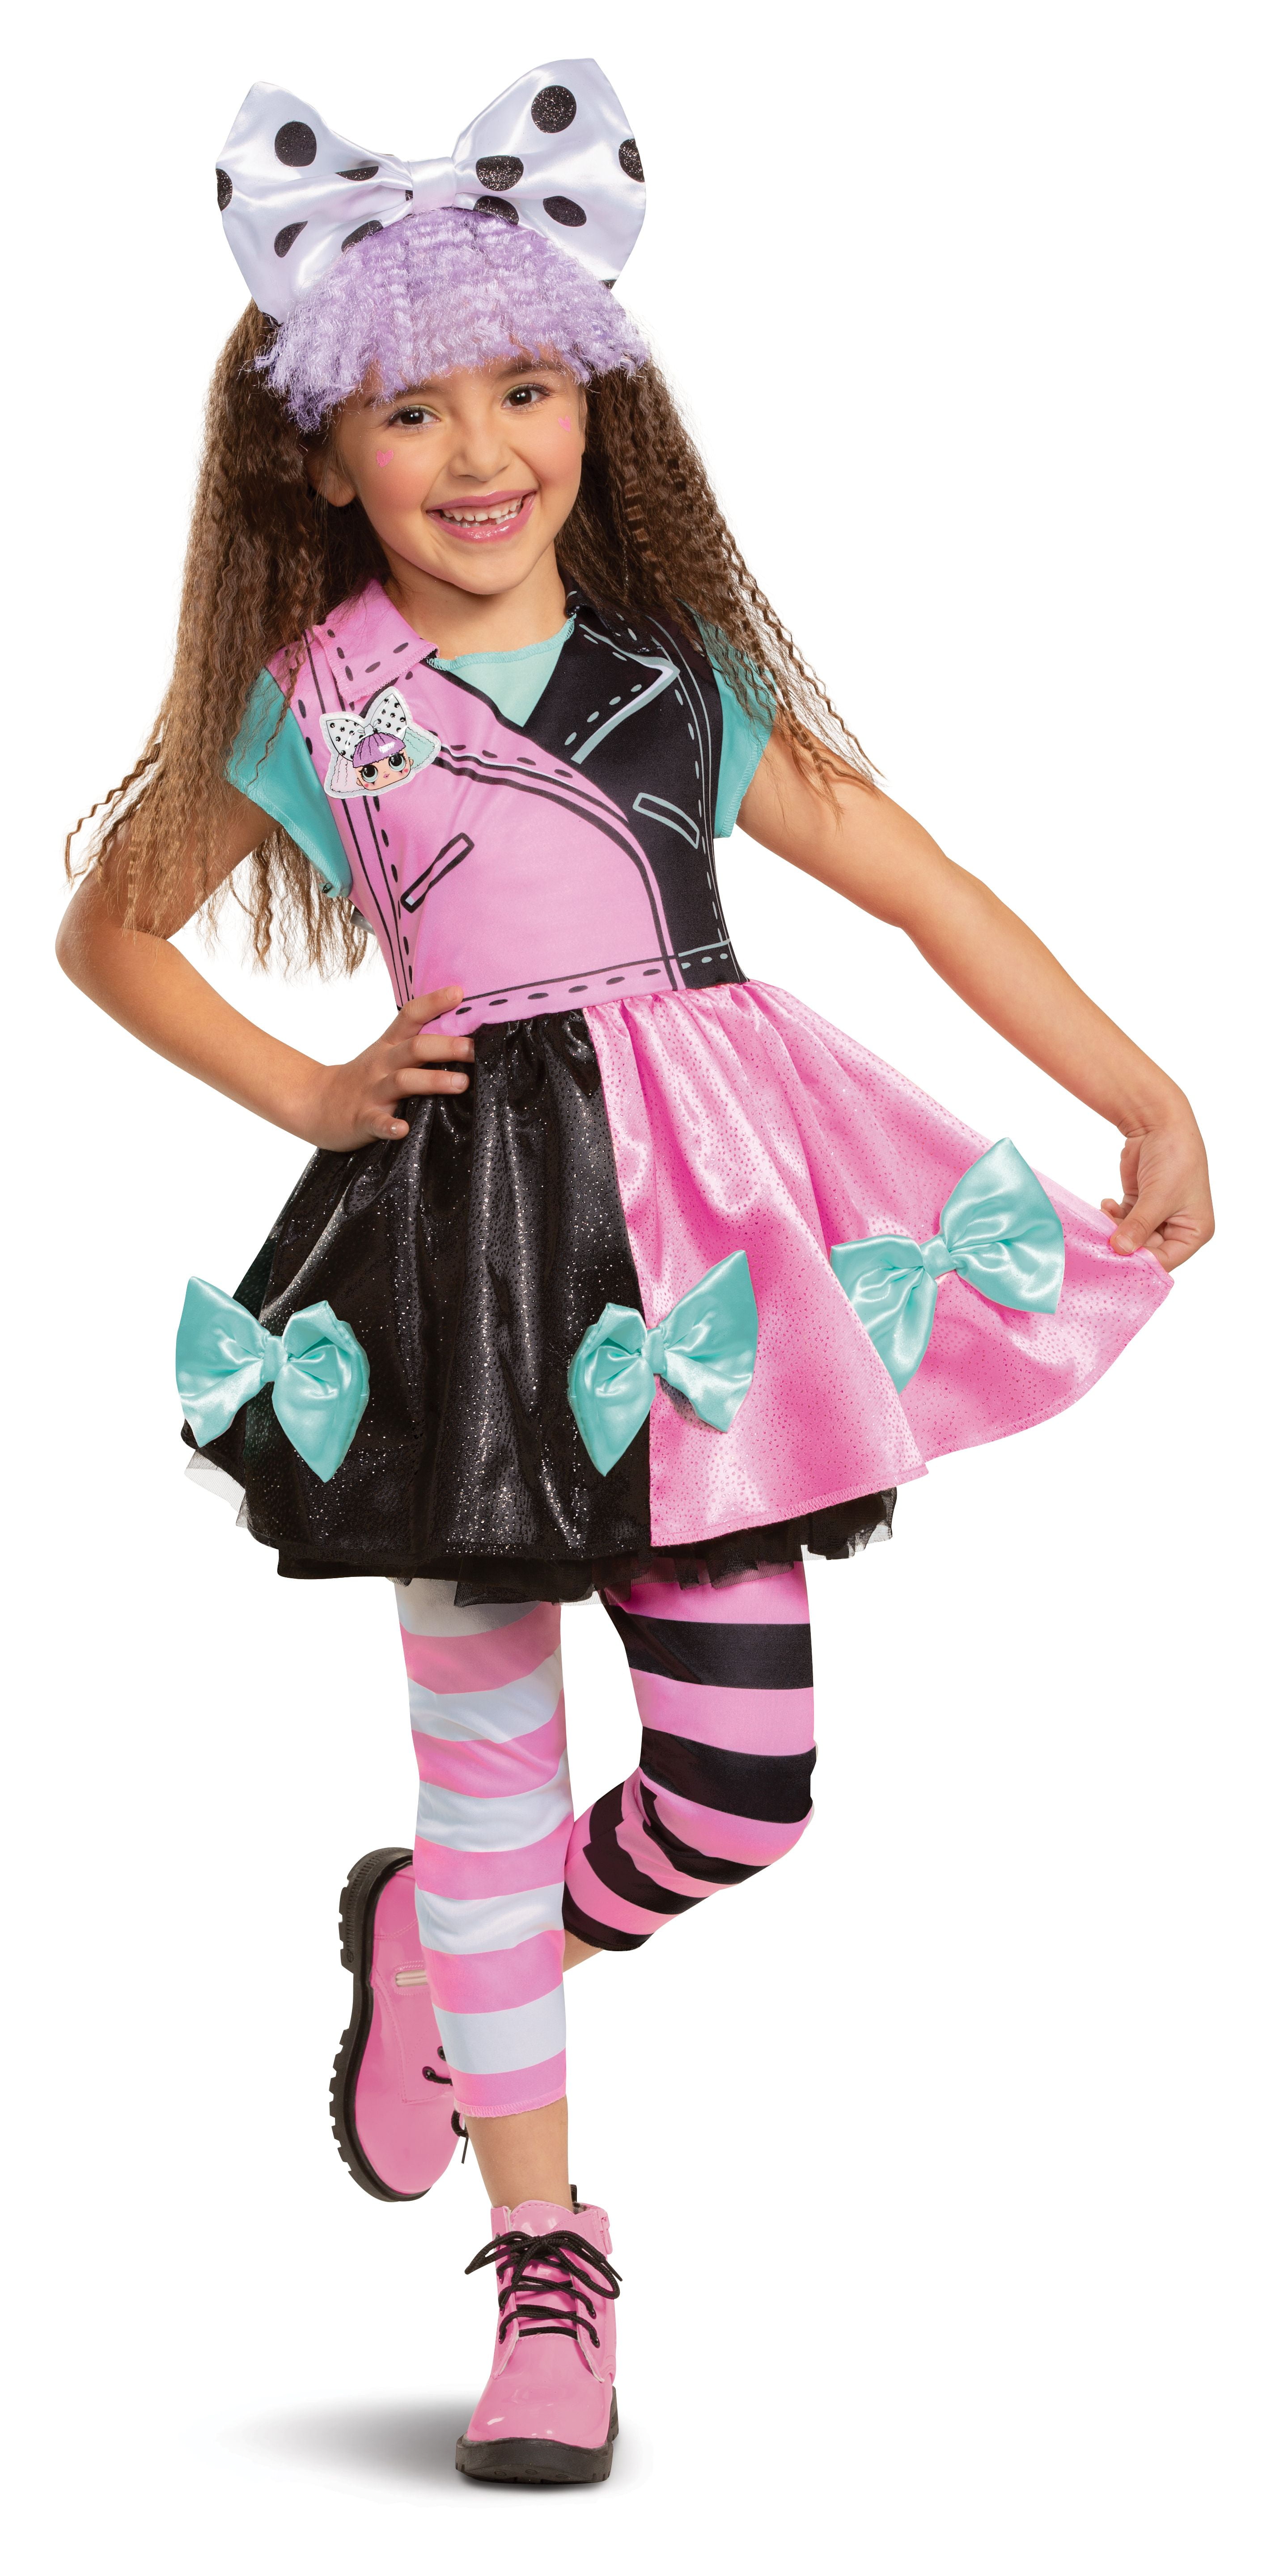 lol doll costumes for halloween